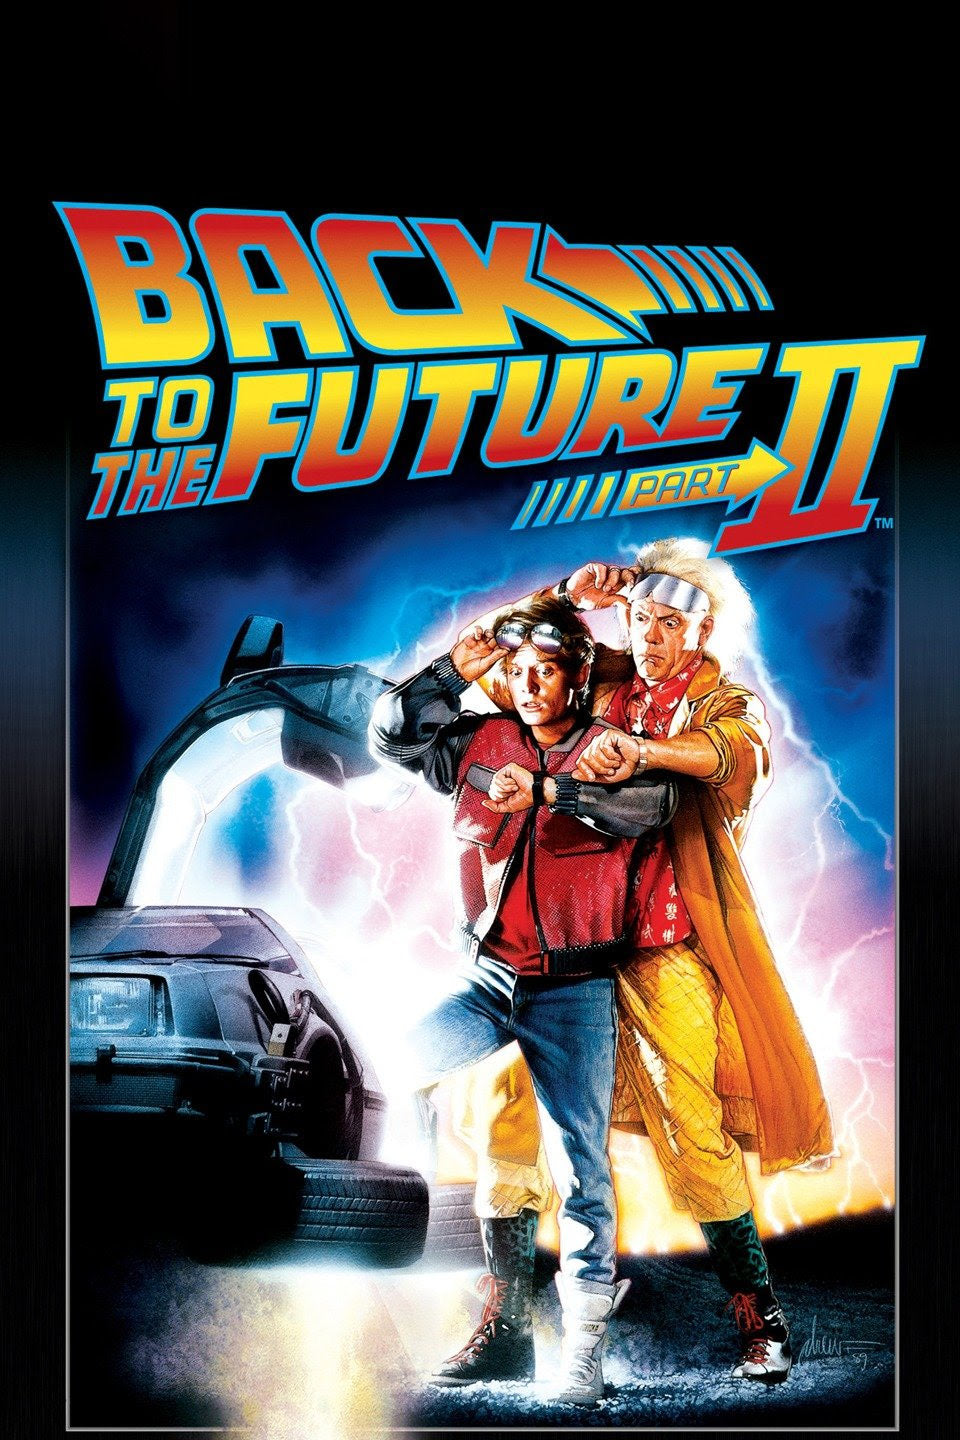 Back to the Future: Part II (1989) Vudu or Movies Anywhere HD redemption only